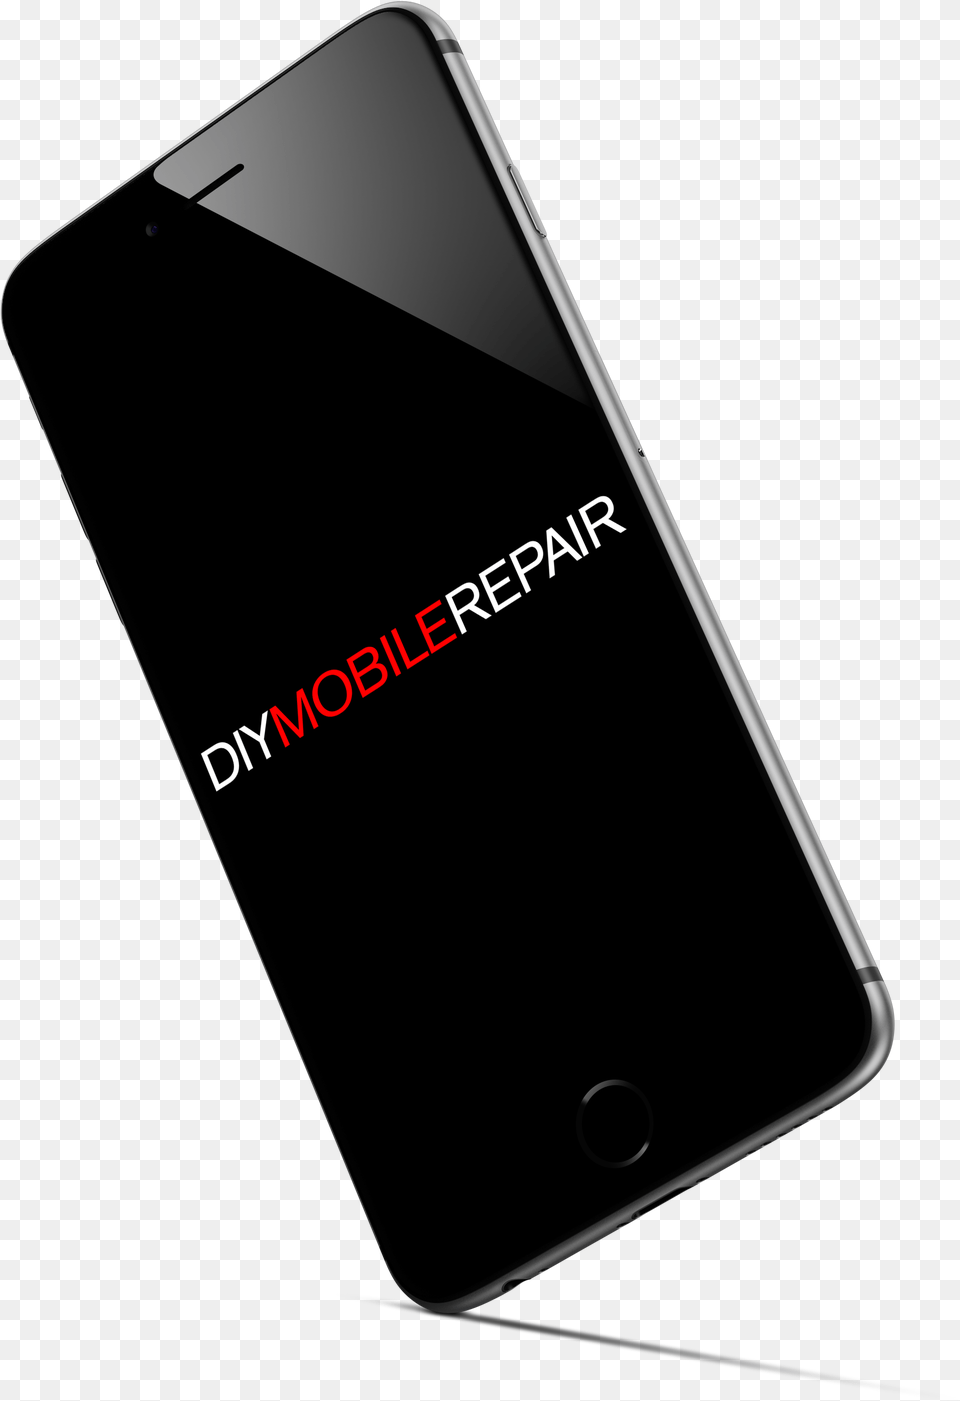 Cracked Phone Screen Download Smartphone, Electronics, Mobile Phone, Iphone Png Image